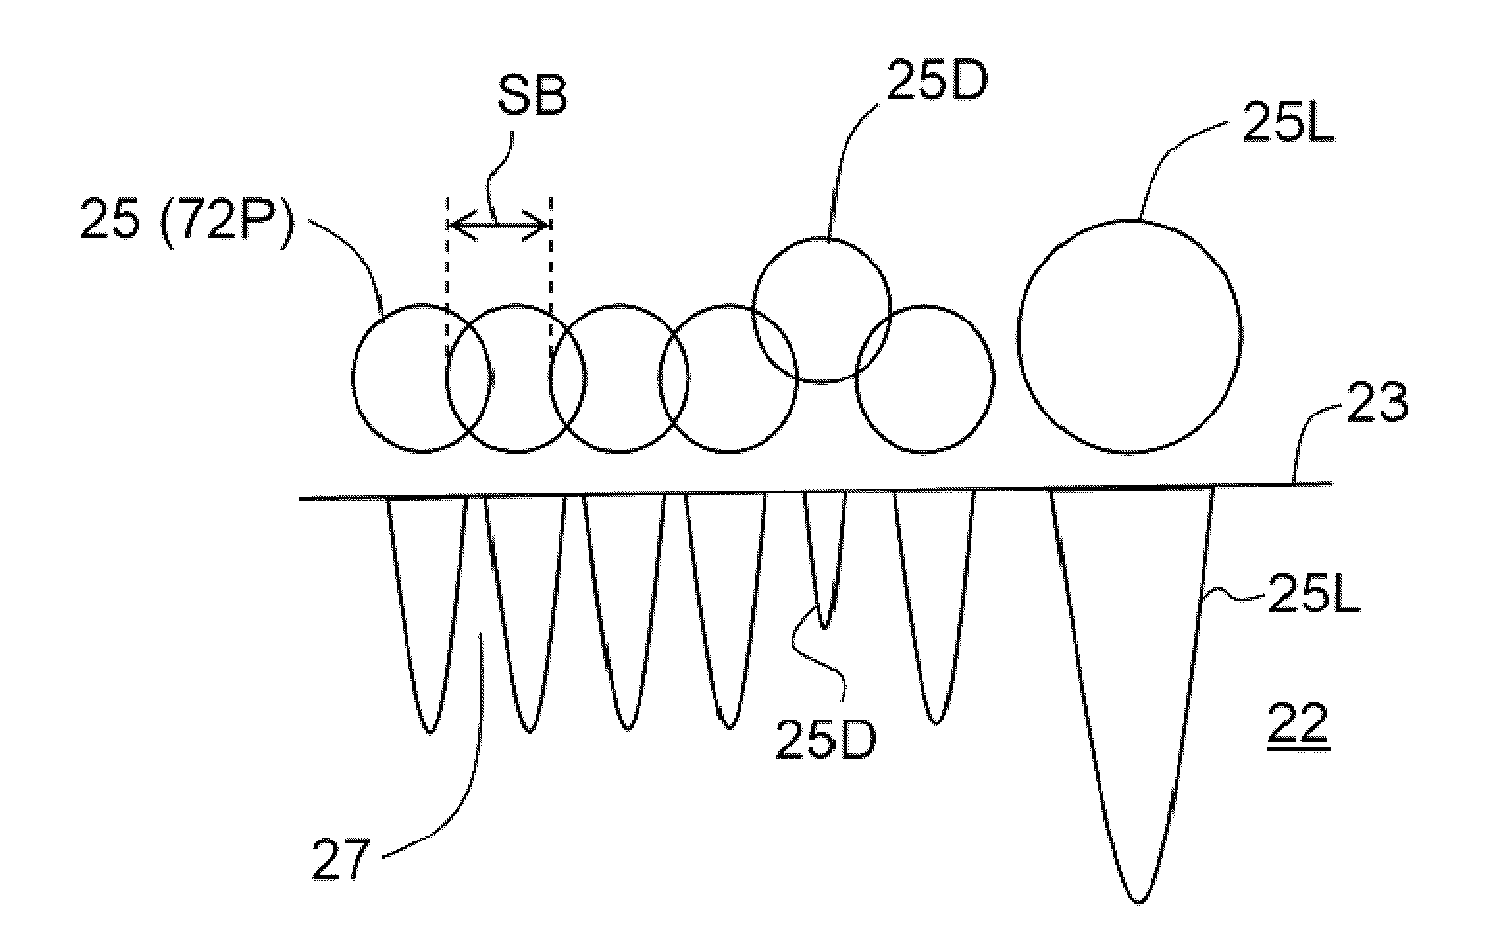 Stereolithography systems and methods using internal laser modulation